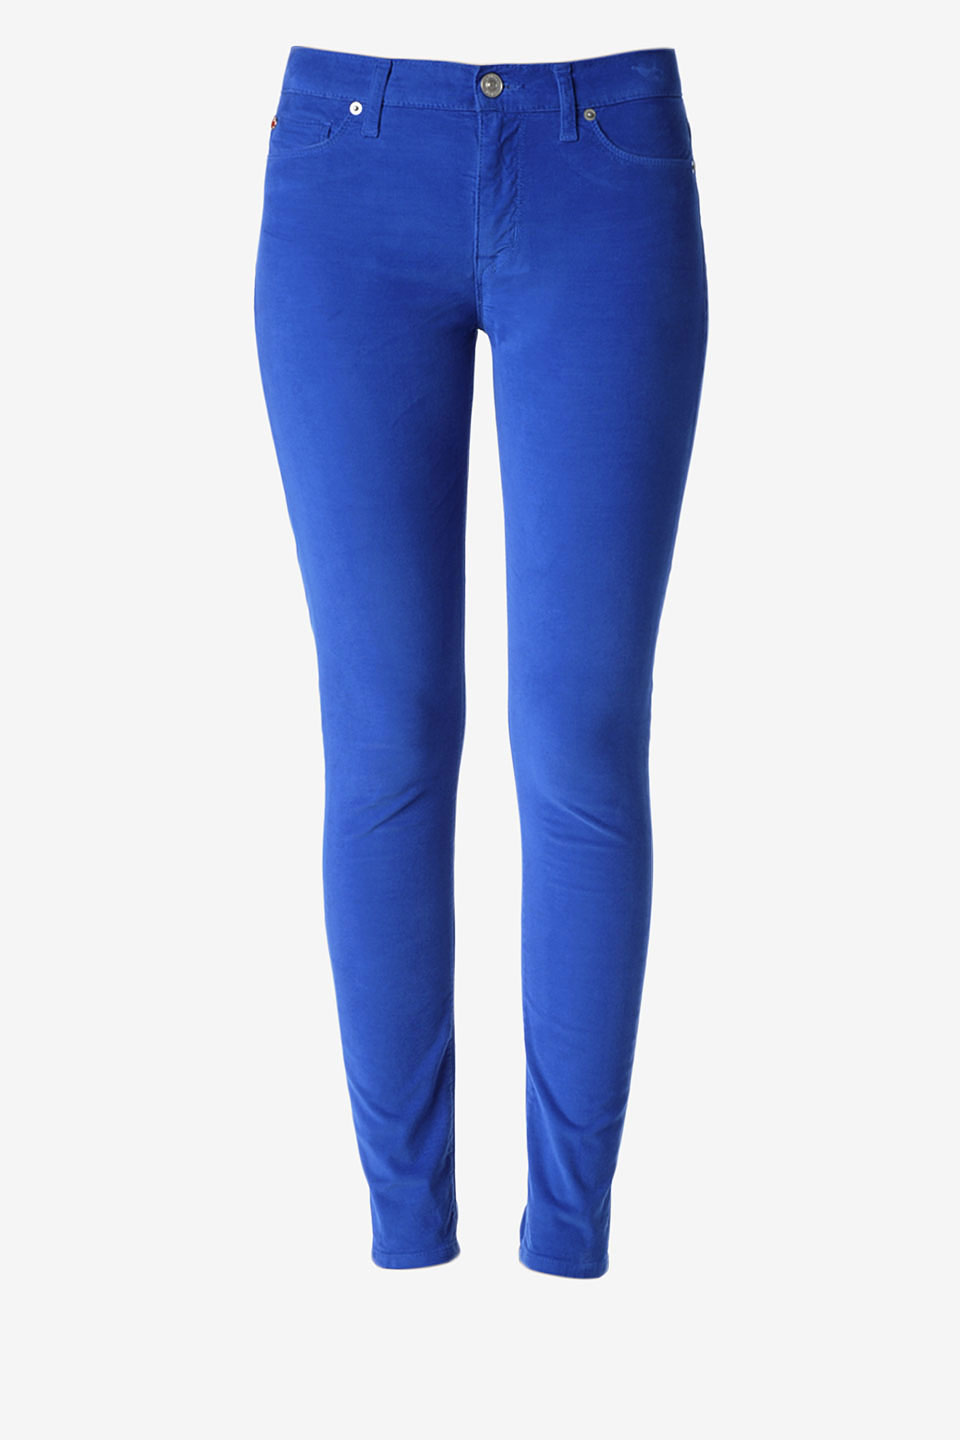 Hudson jeans Nico Mid Rise Super Skinny in Blue | Lyst